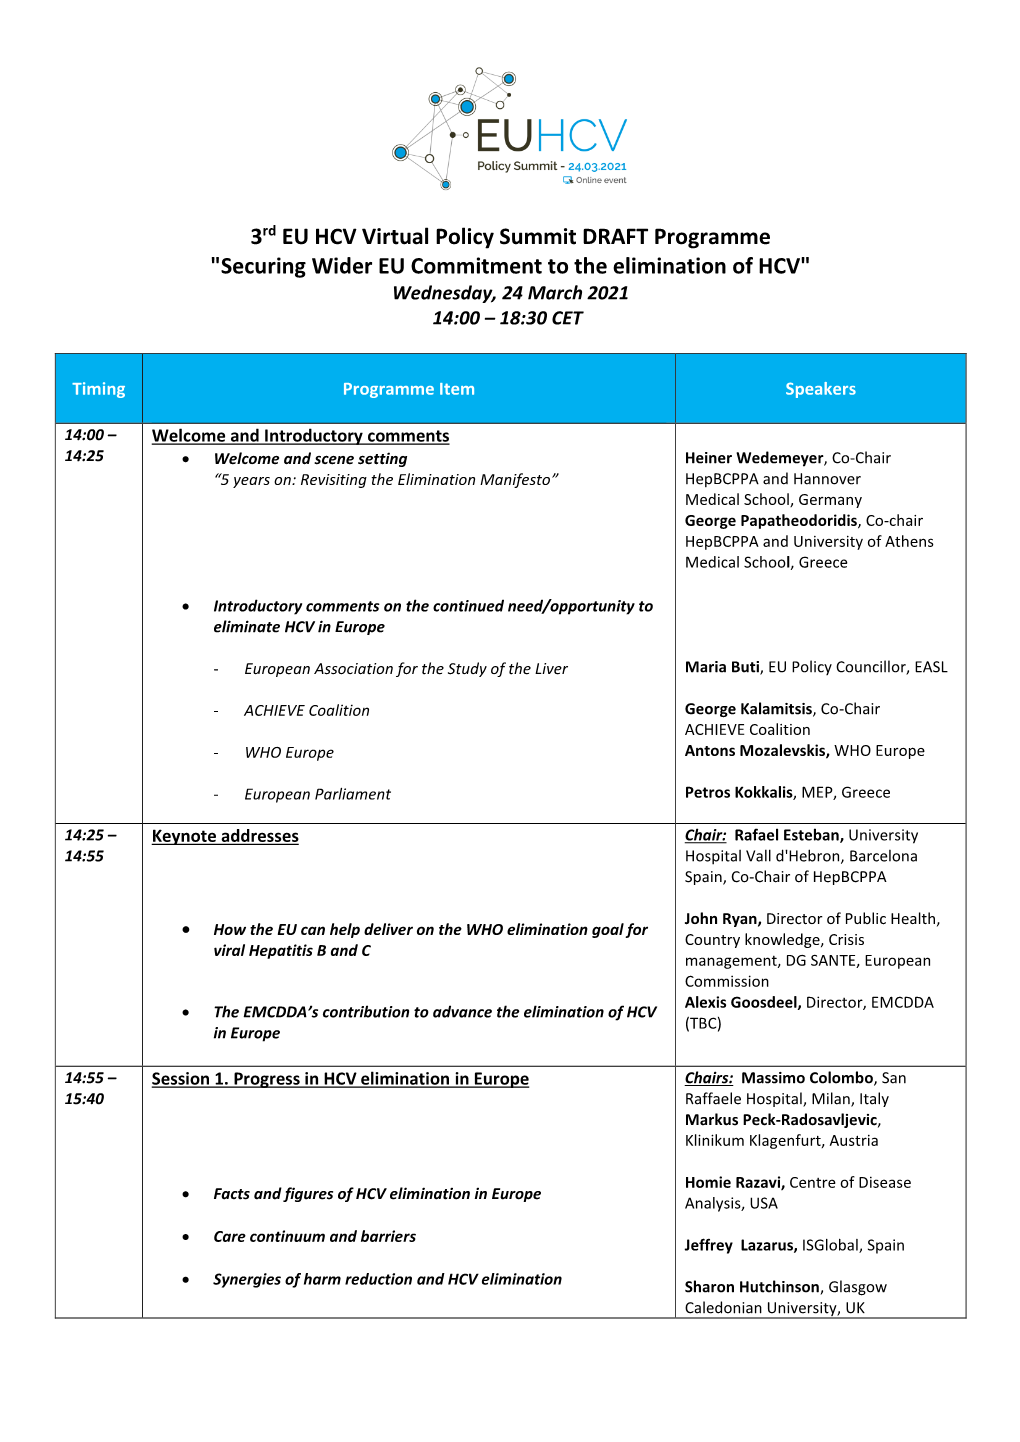 3Rd EU HCV Virtual Policy Summit DRAFT Programme "Securing Wider EU Commitment to the Elimination of HCV" Wednesday, 24 March 2021 14:00 – 18:30 CET